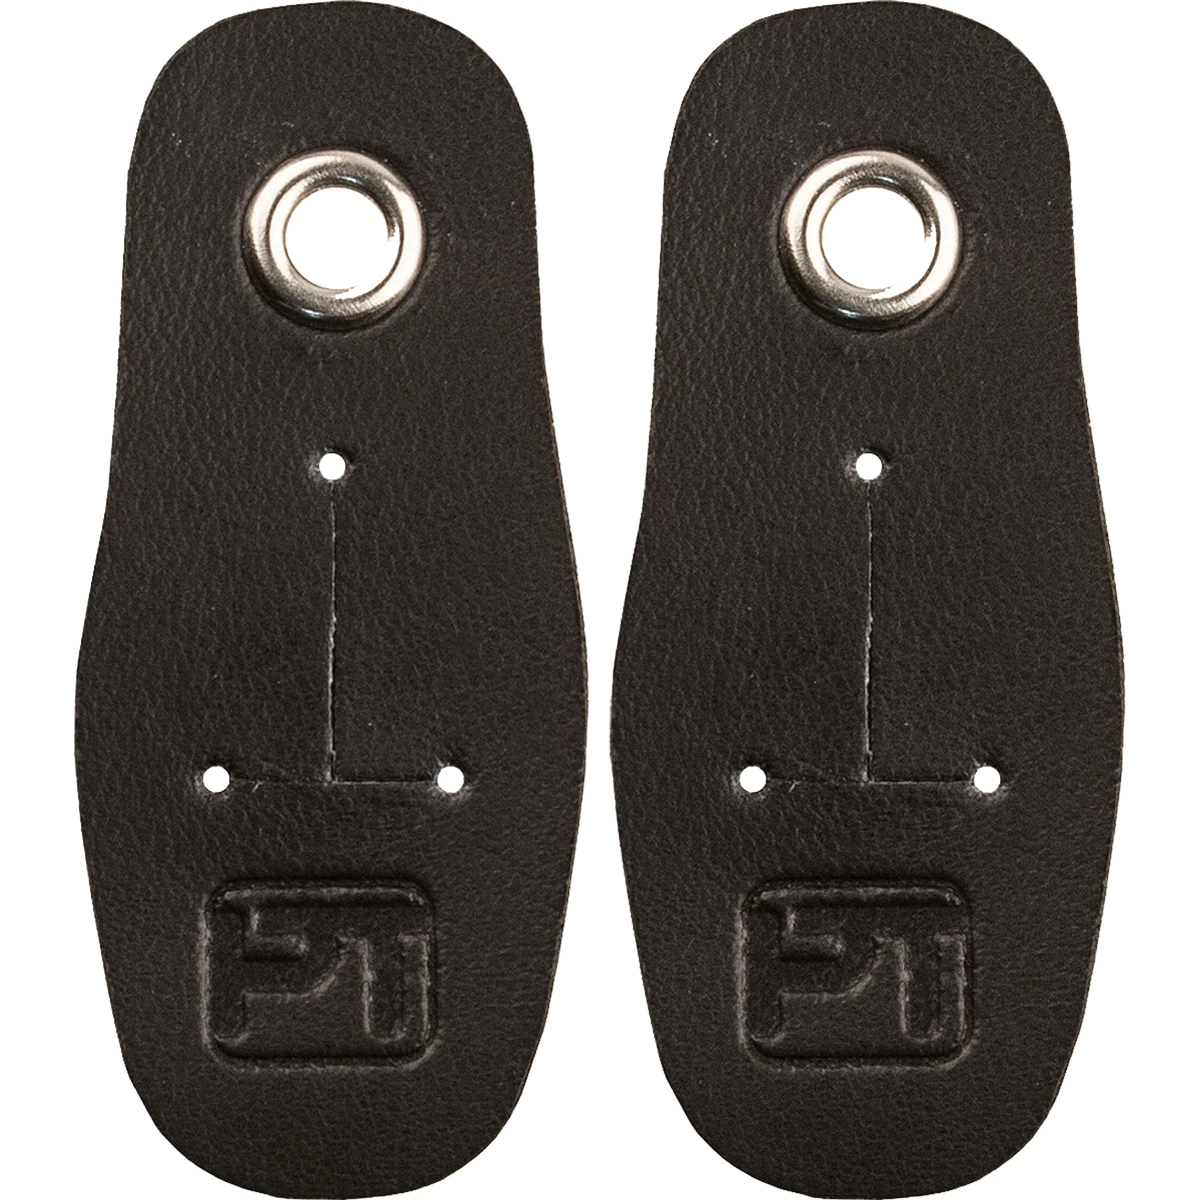 PROTEC Replacement Leather Tabs for Clarinet Neck Strap